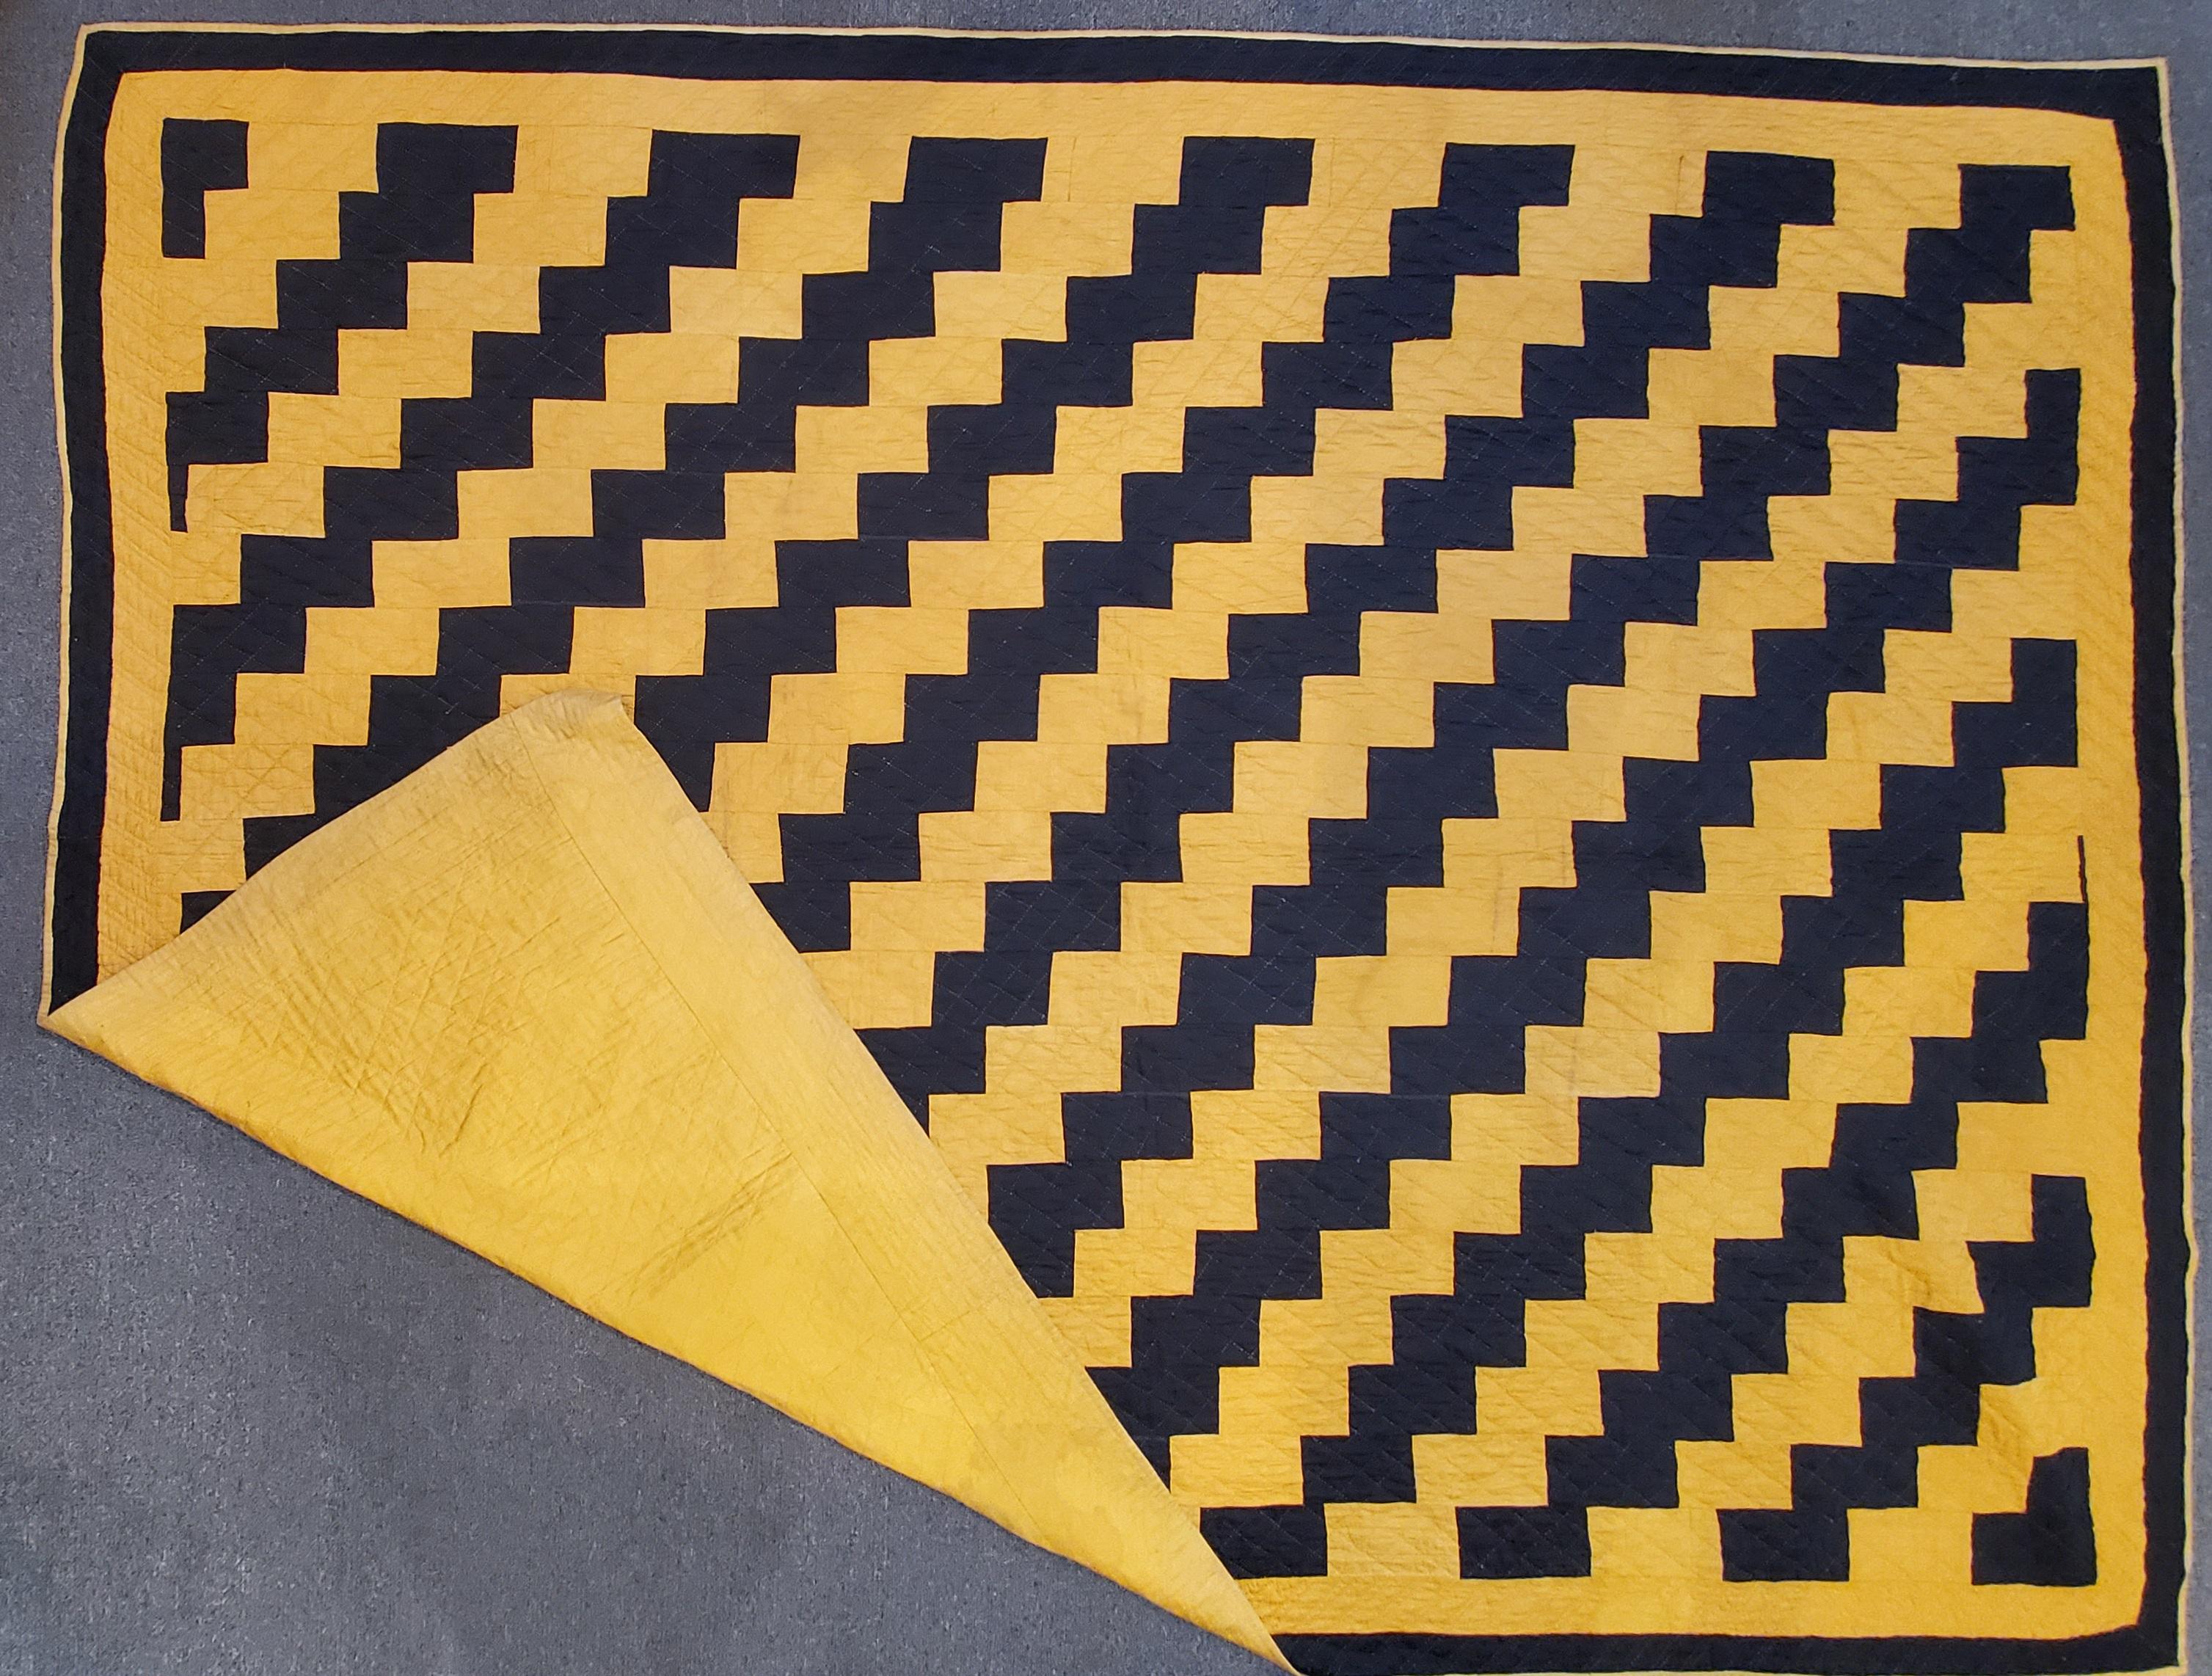 This amazing polished cotton streak of lightning quilt or zig zag quilt is from Pennsylvania. The condition is good and fabric is amazing.